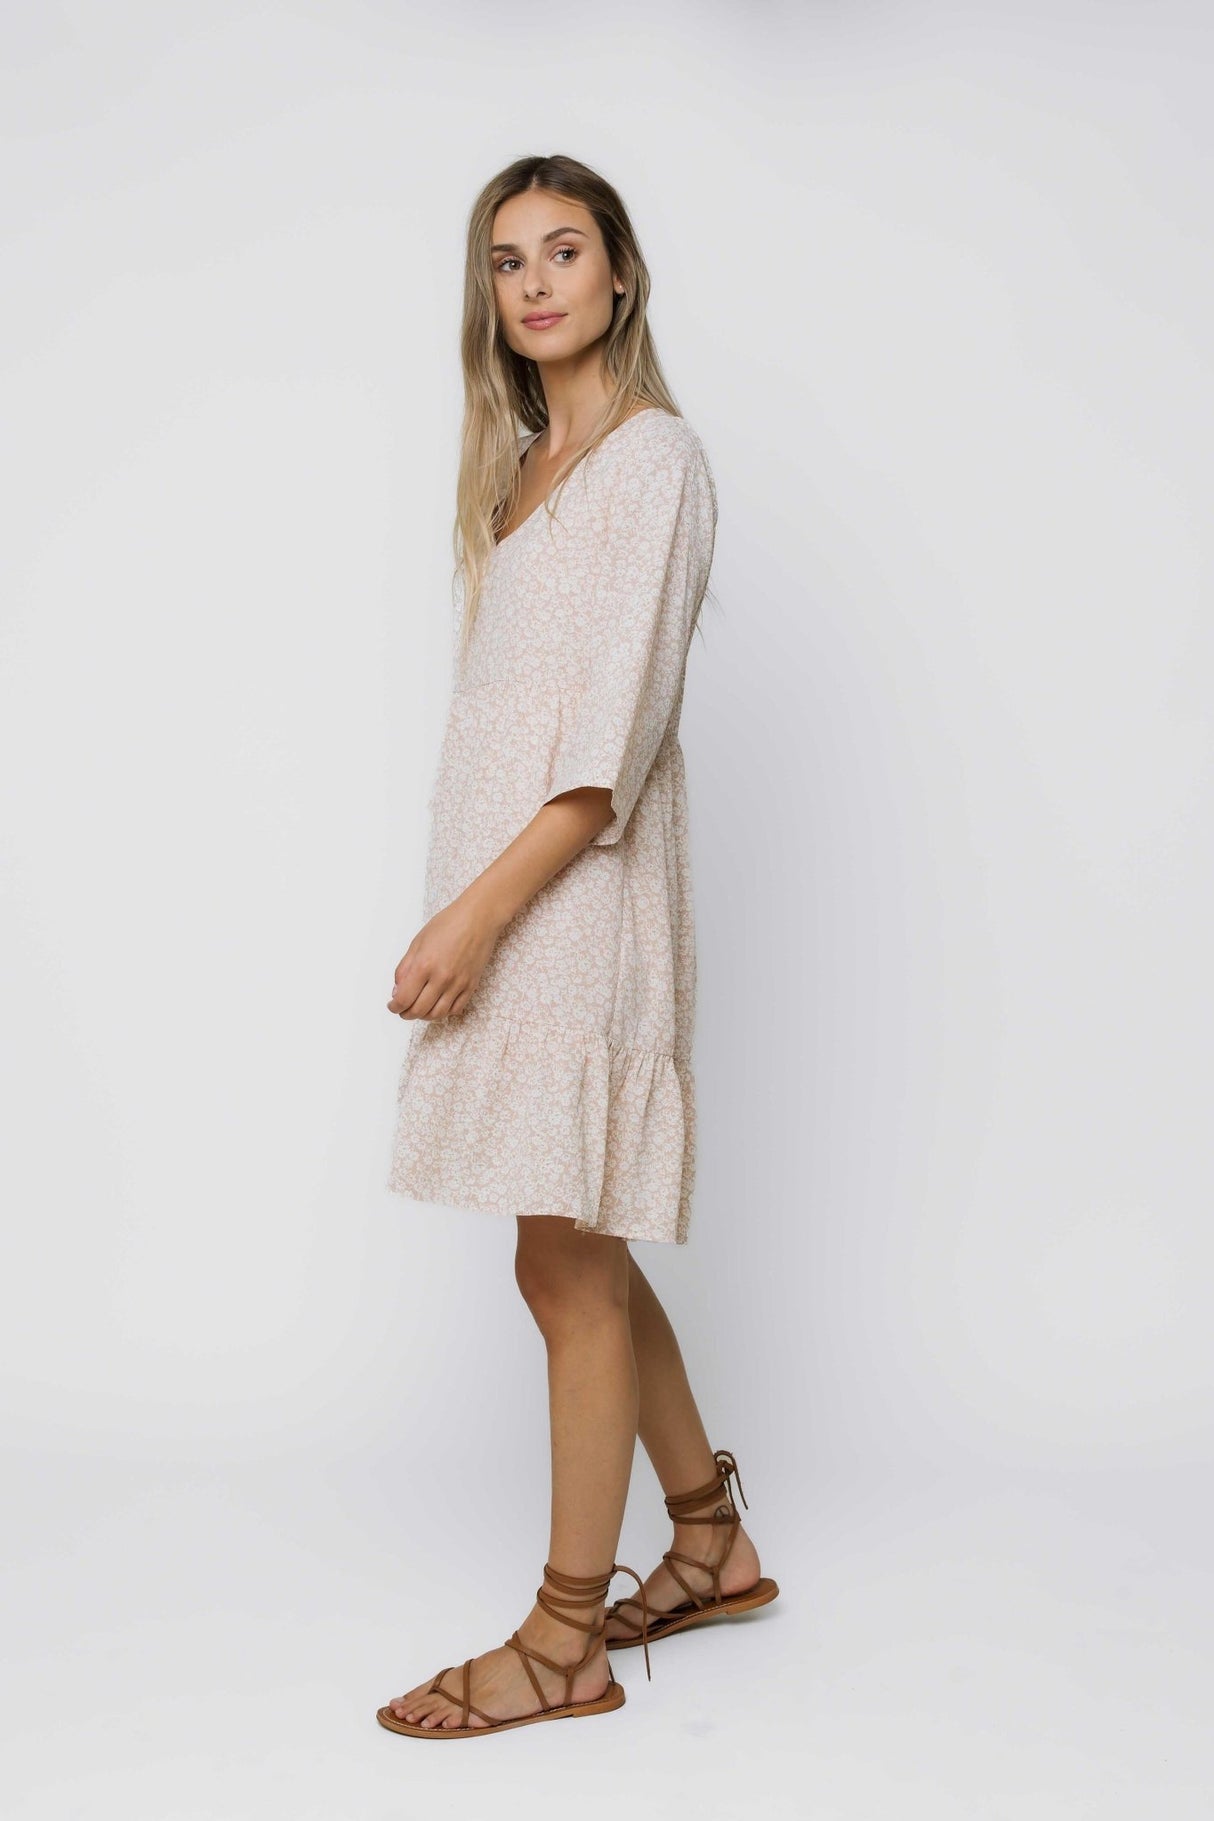 Orb Women's Grace Tiered Dress - A&M Clothing & Shoes